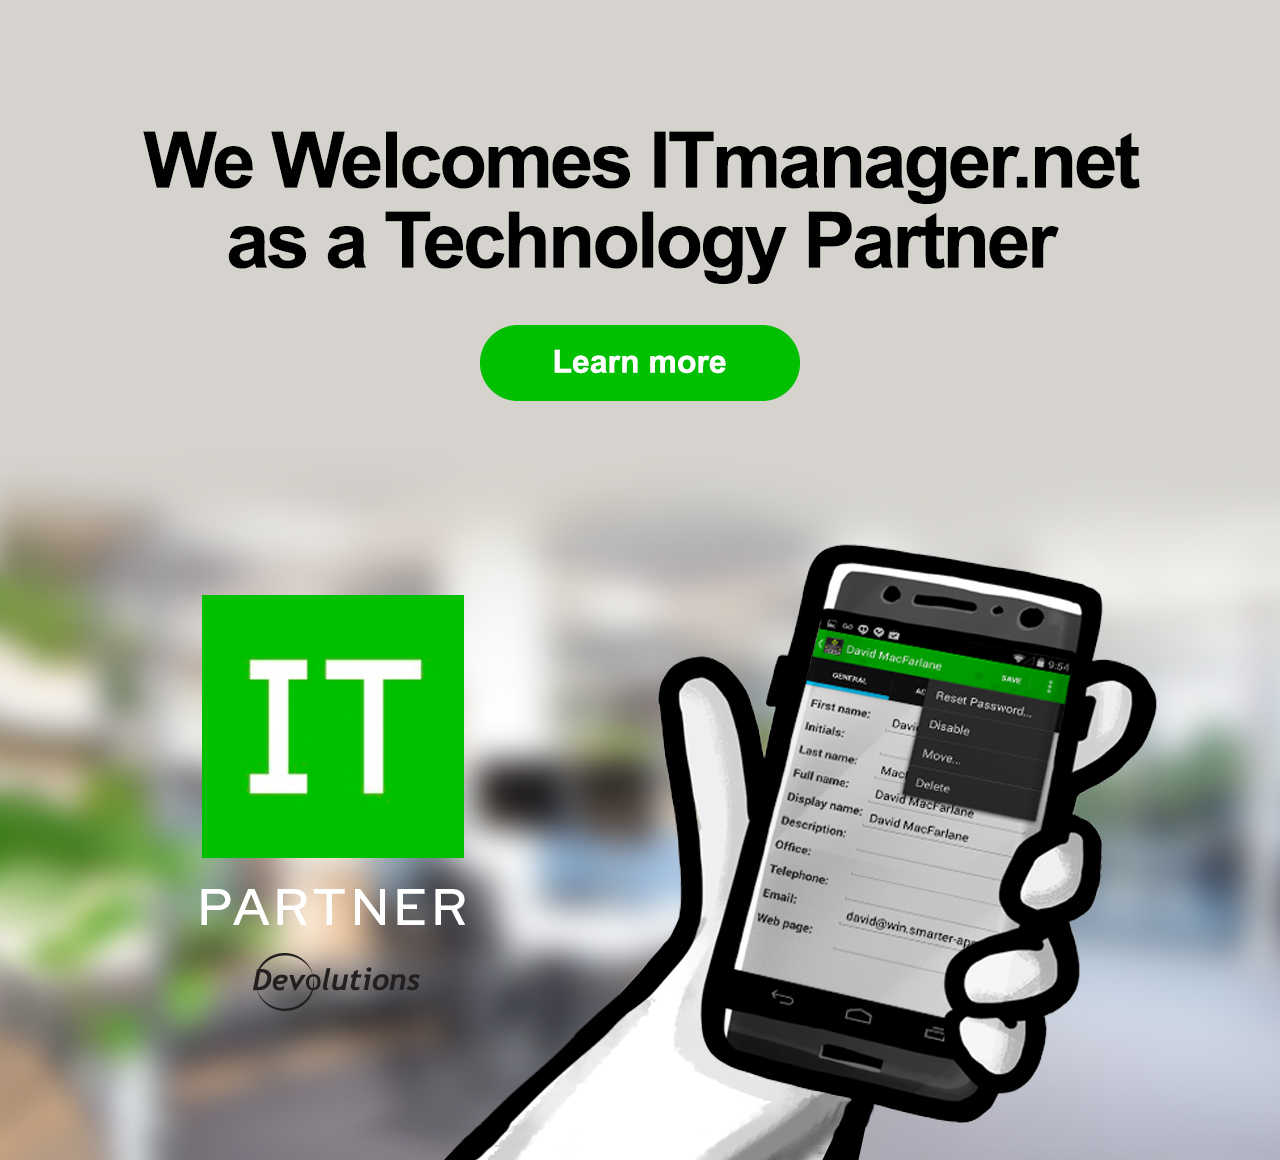 Devolutions Welcomes ITmanager.net as Technology Partner